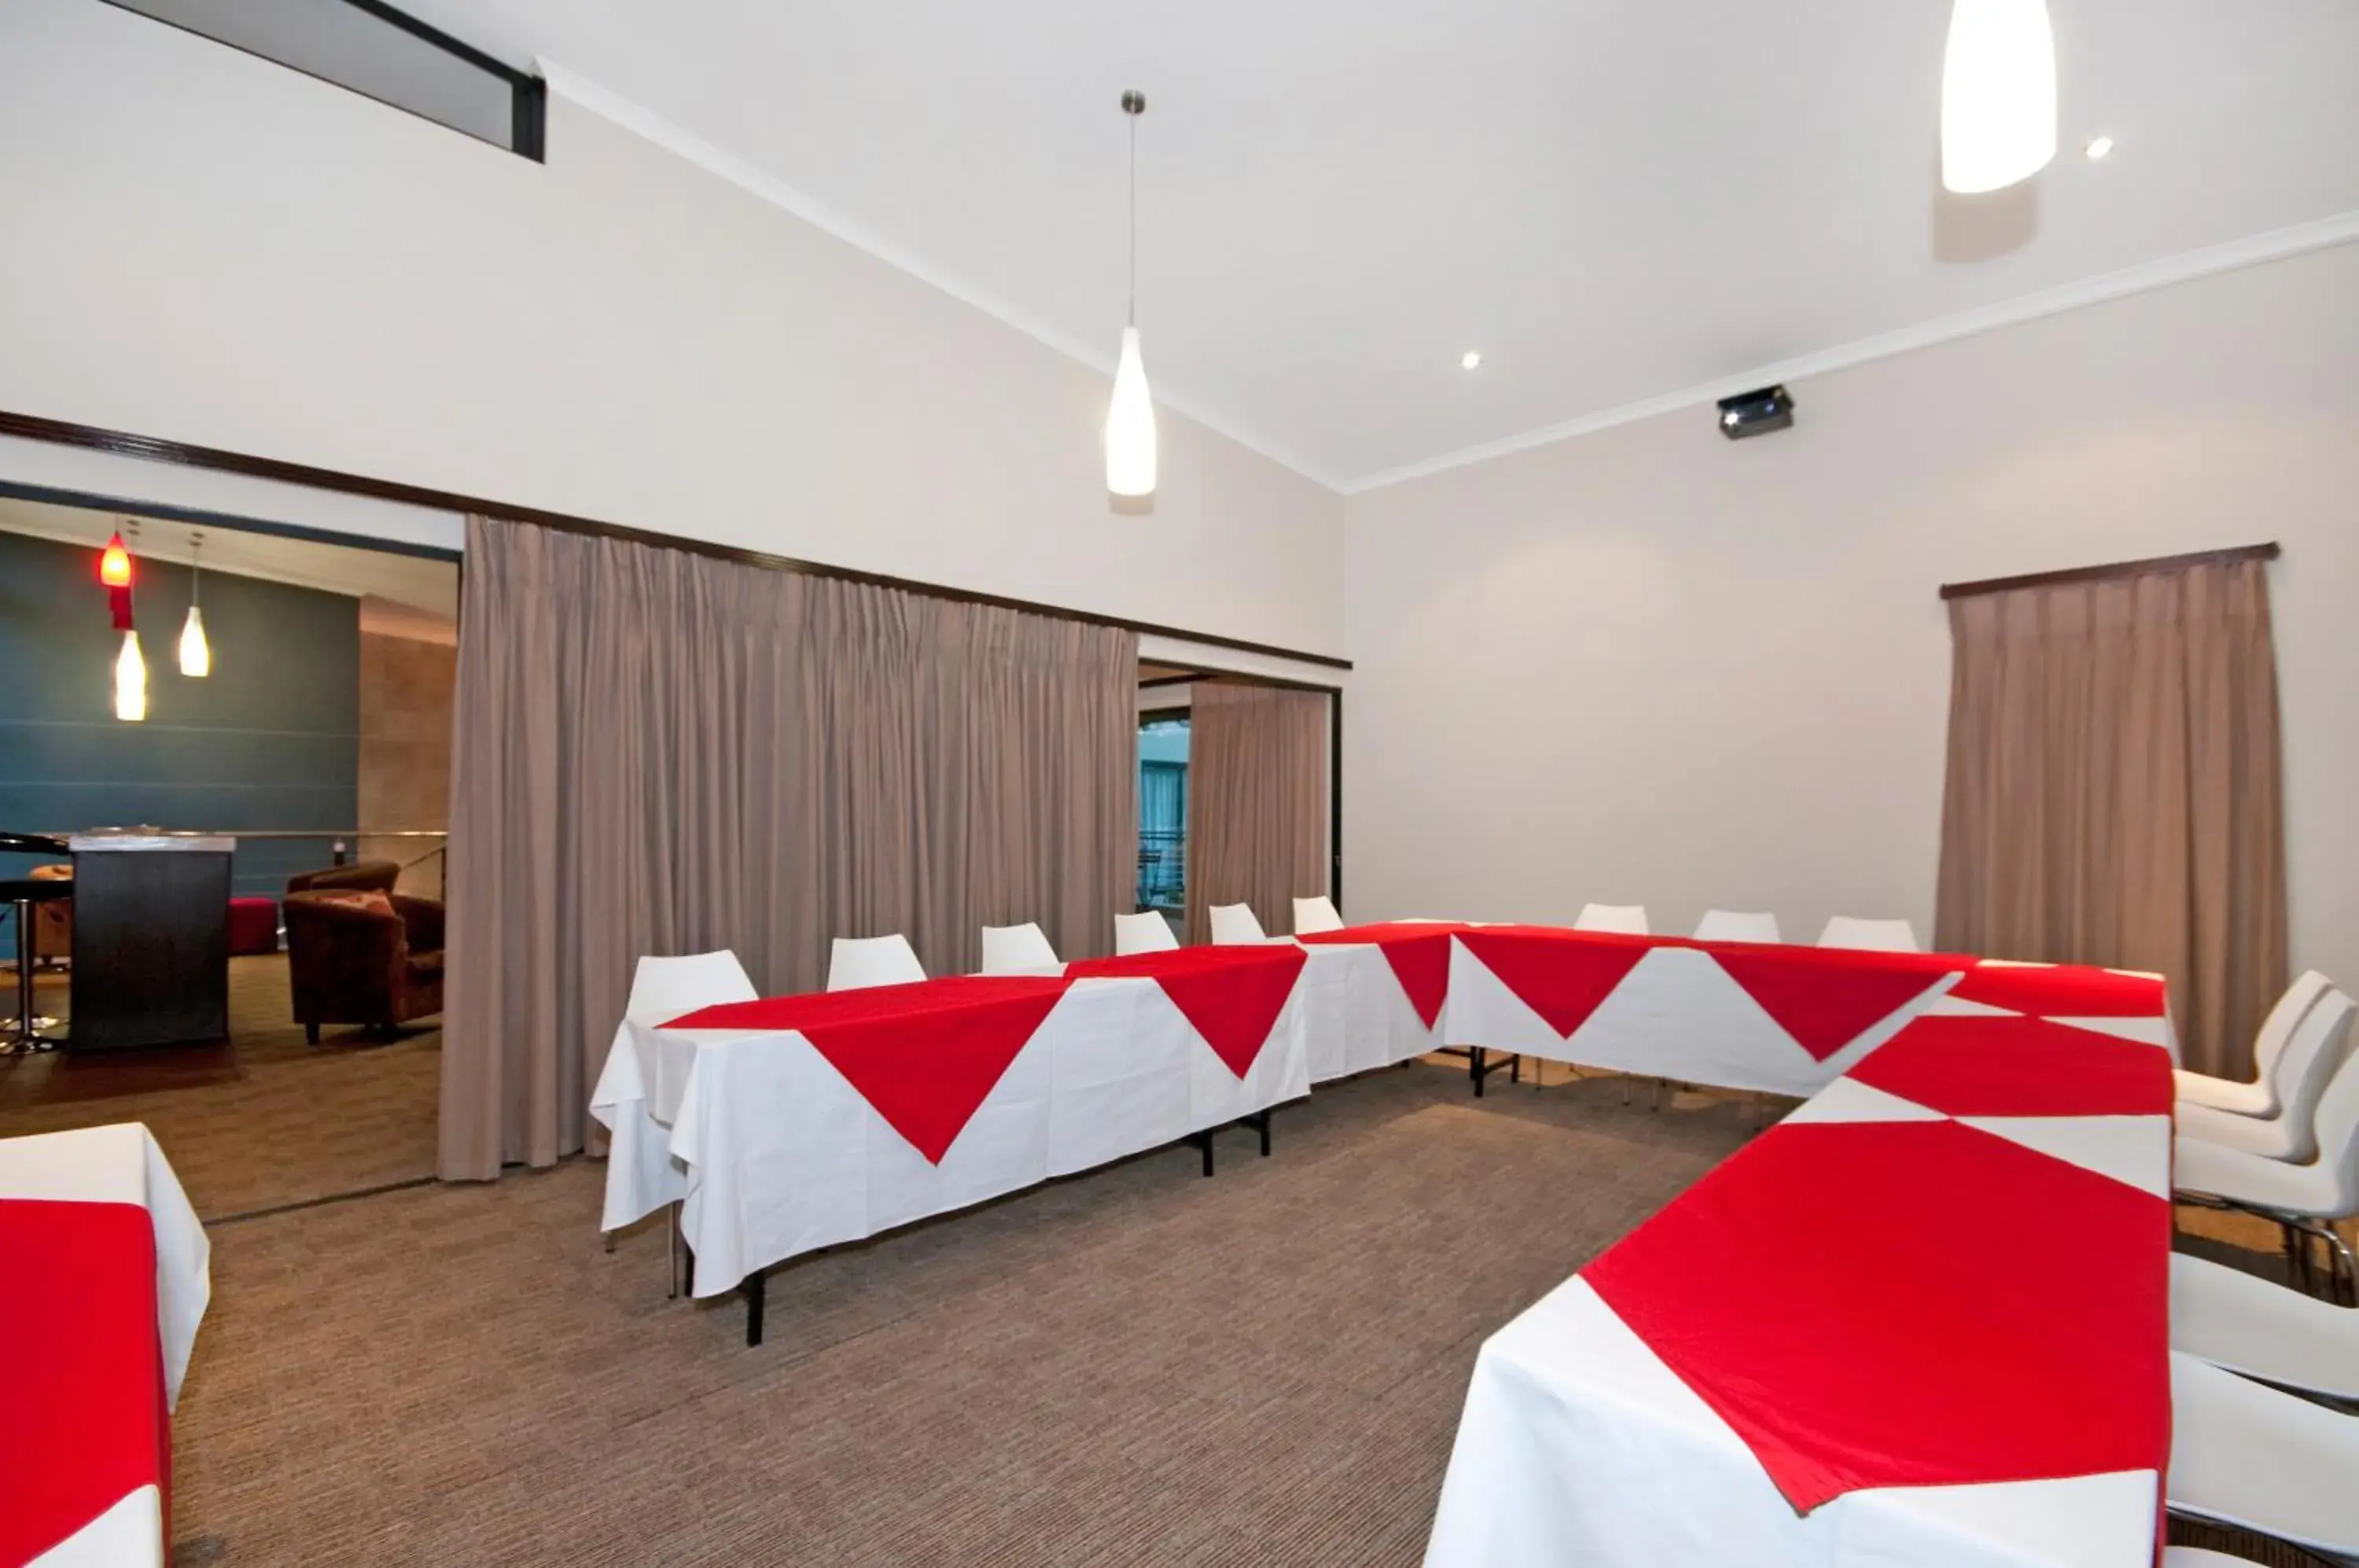 Meeting/conference room, Business Area/Conference Room in The Hub Boutique Hotel